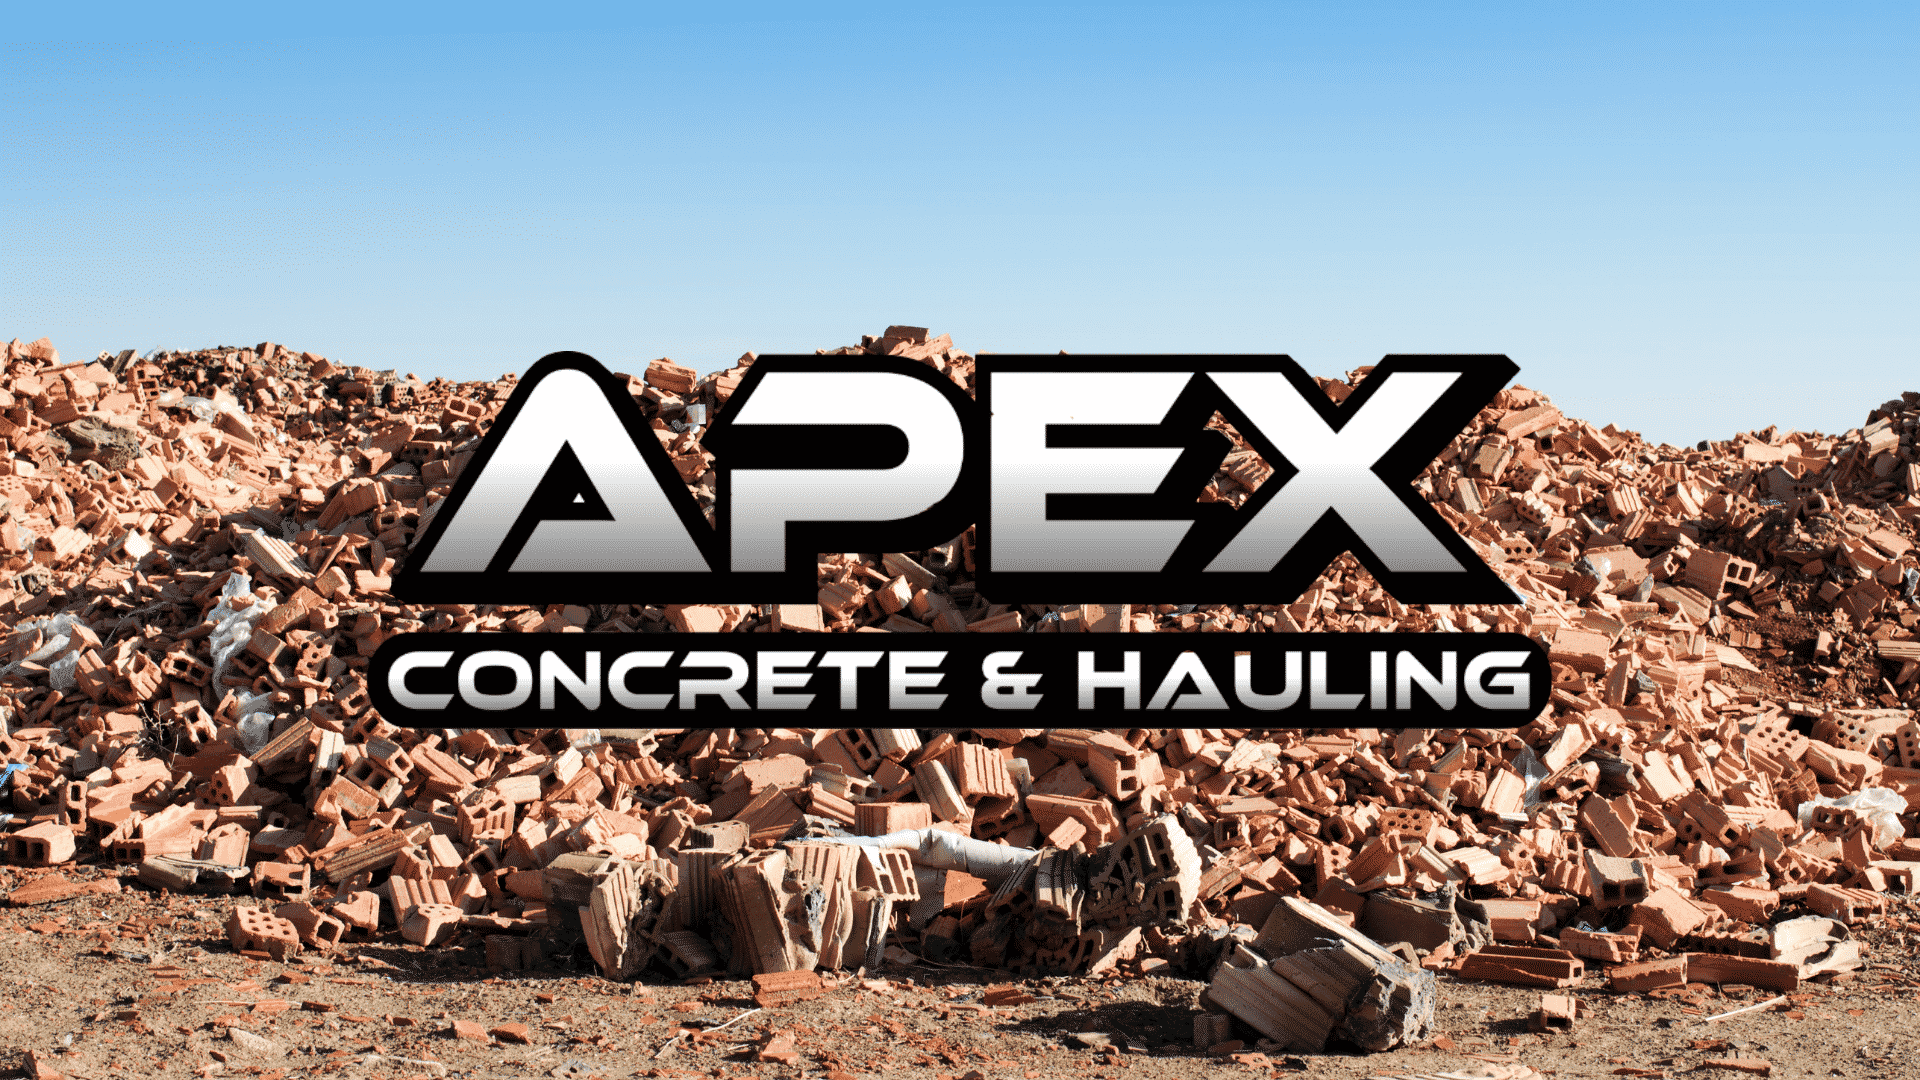 Construction Material Waste and Apex Hauling Logo